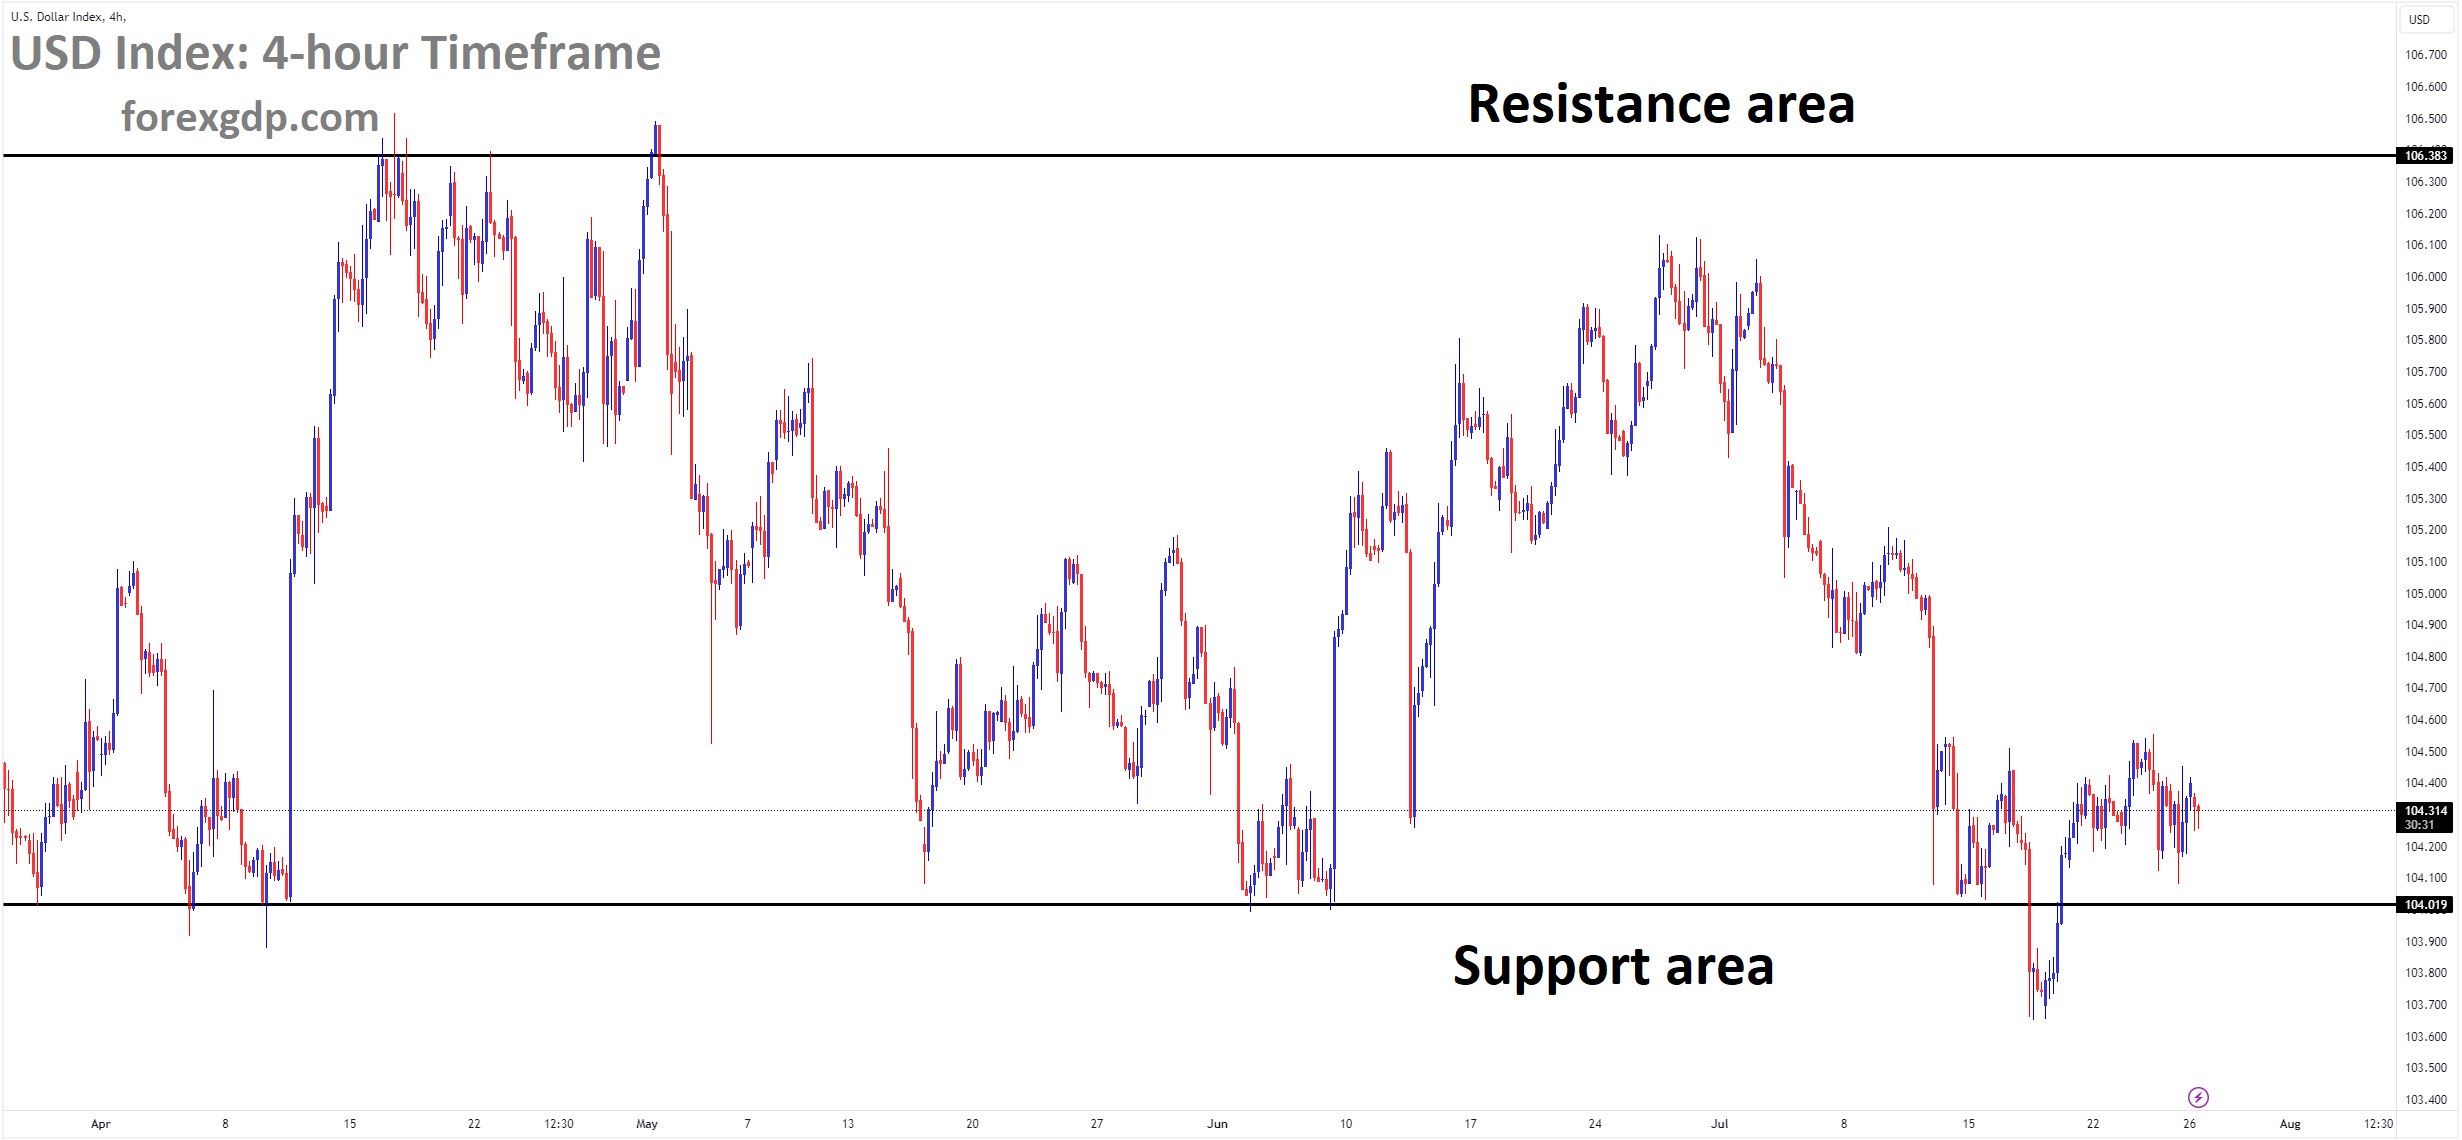 USD Index Market price is moving in box pattern and market has rebounded from the support area of the pattern